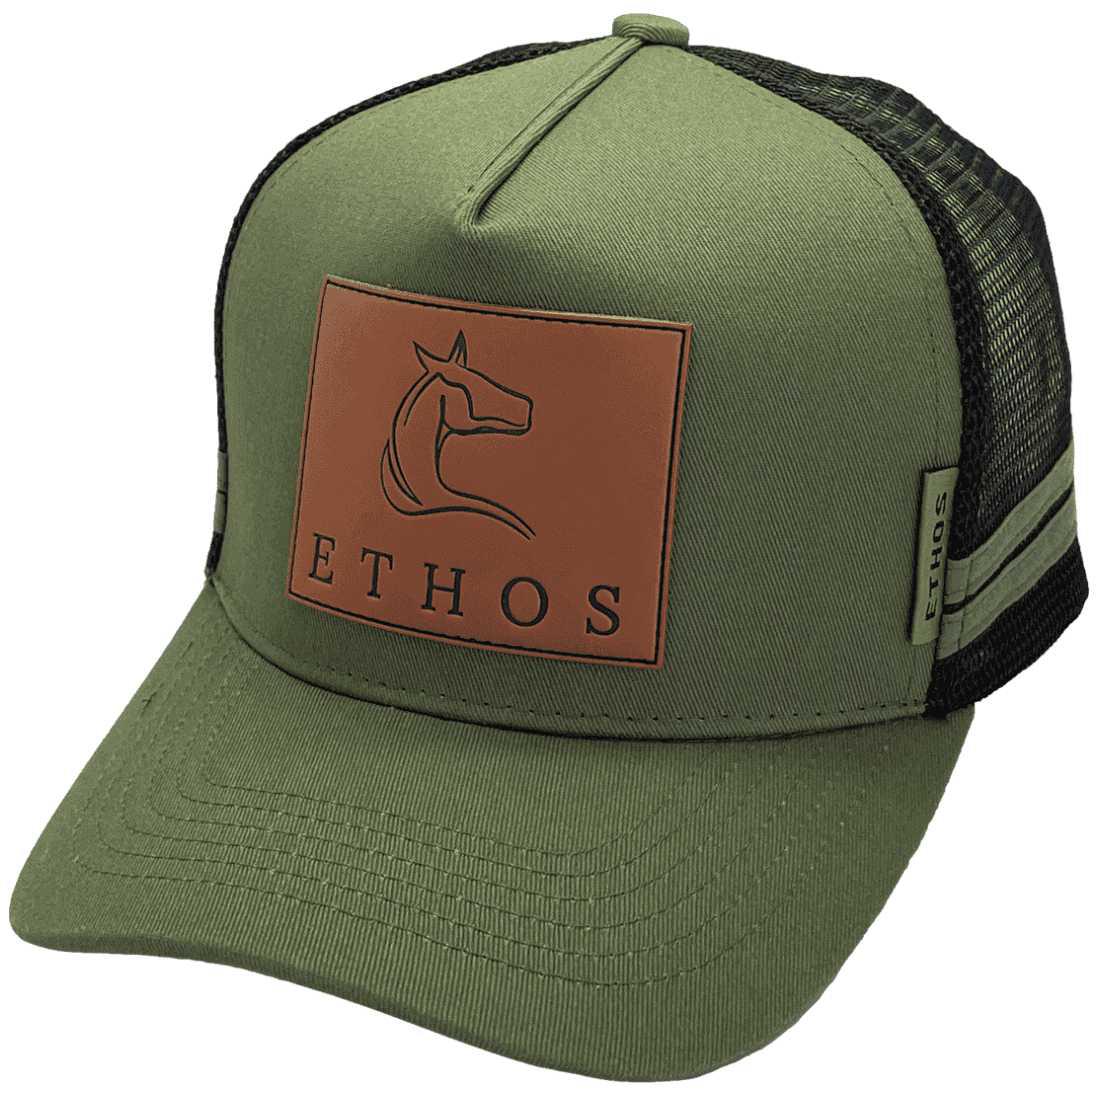 Ethos - Original Basic Aussie Trucker Hat with double side bands